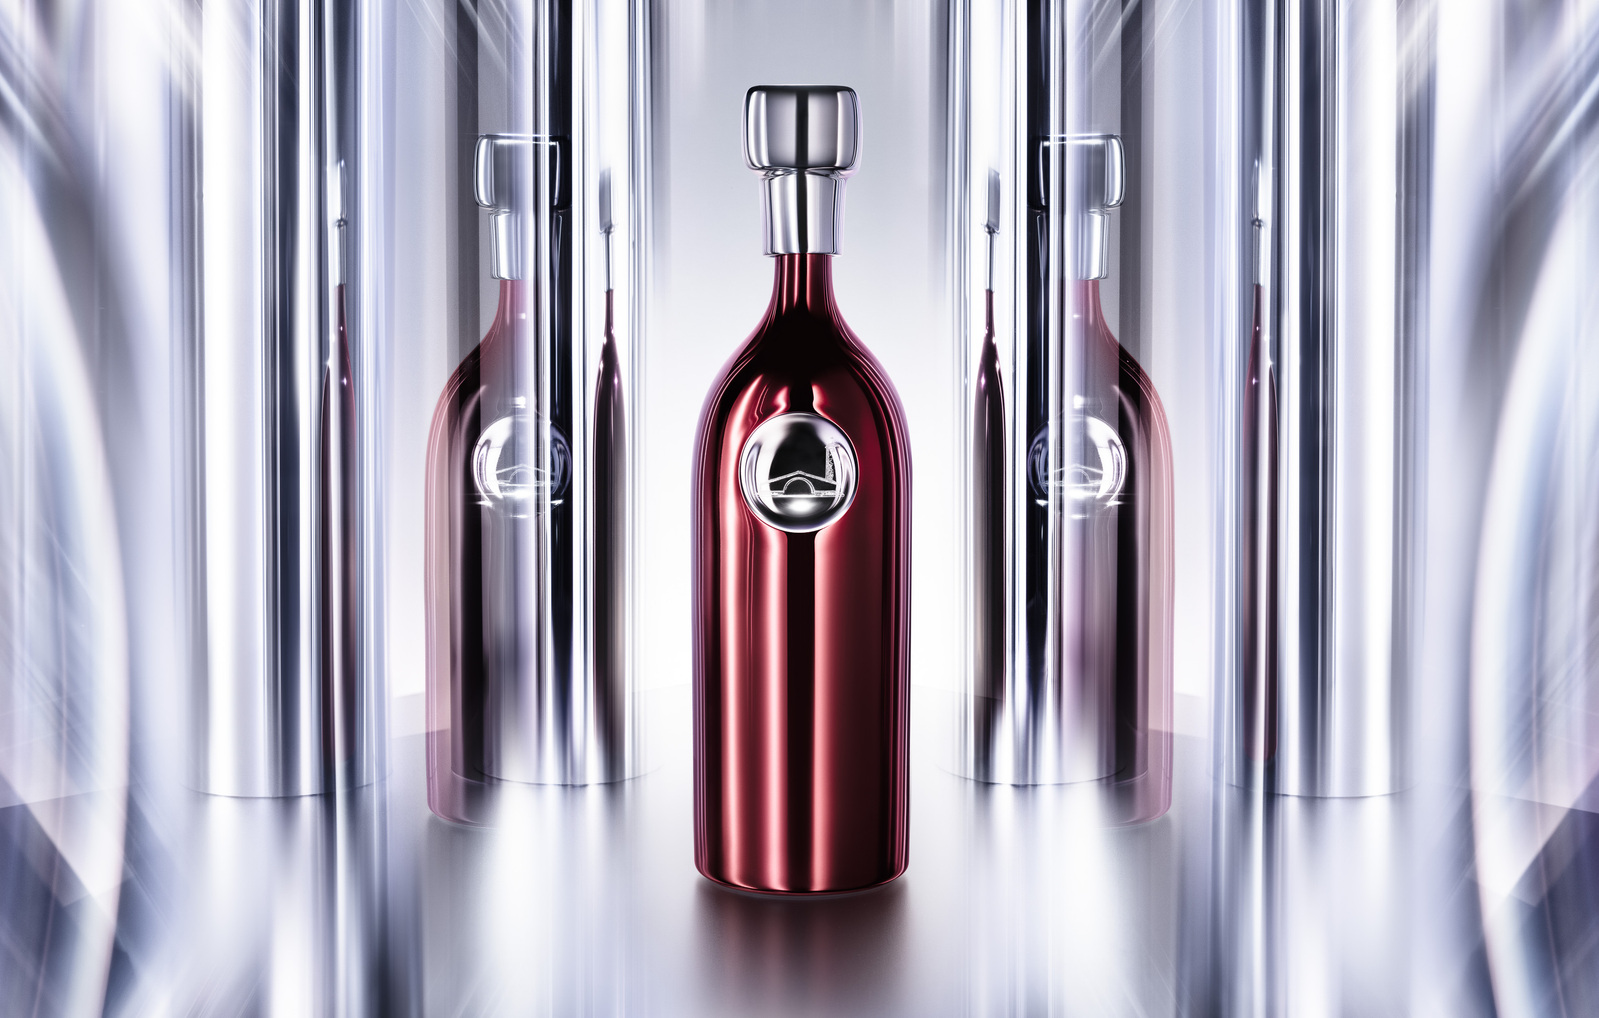 Wine bottle  and beverage product photography by Timothy Hogan in Los Angeles for Robert Mondavi Winery